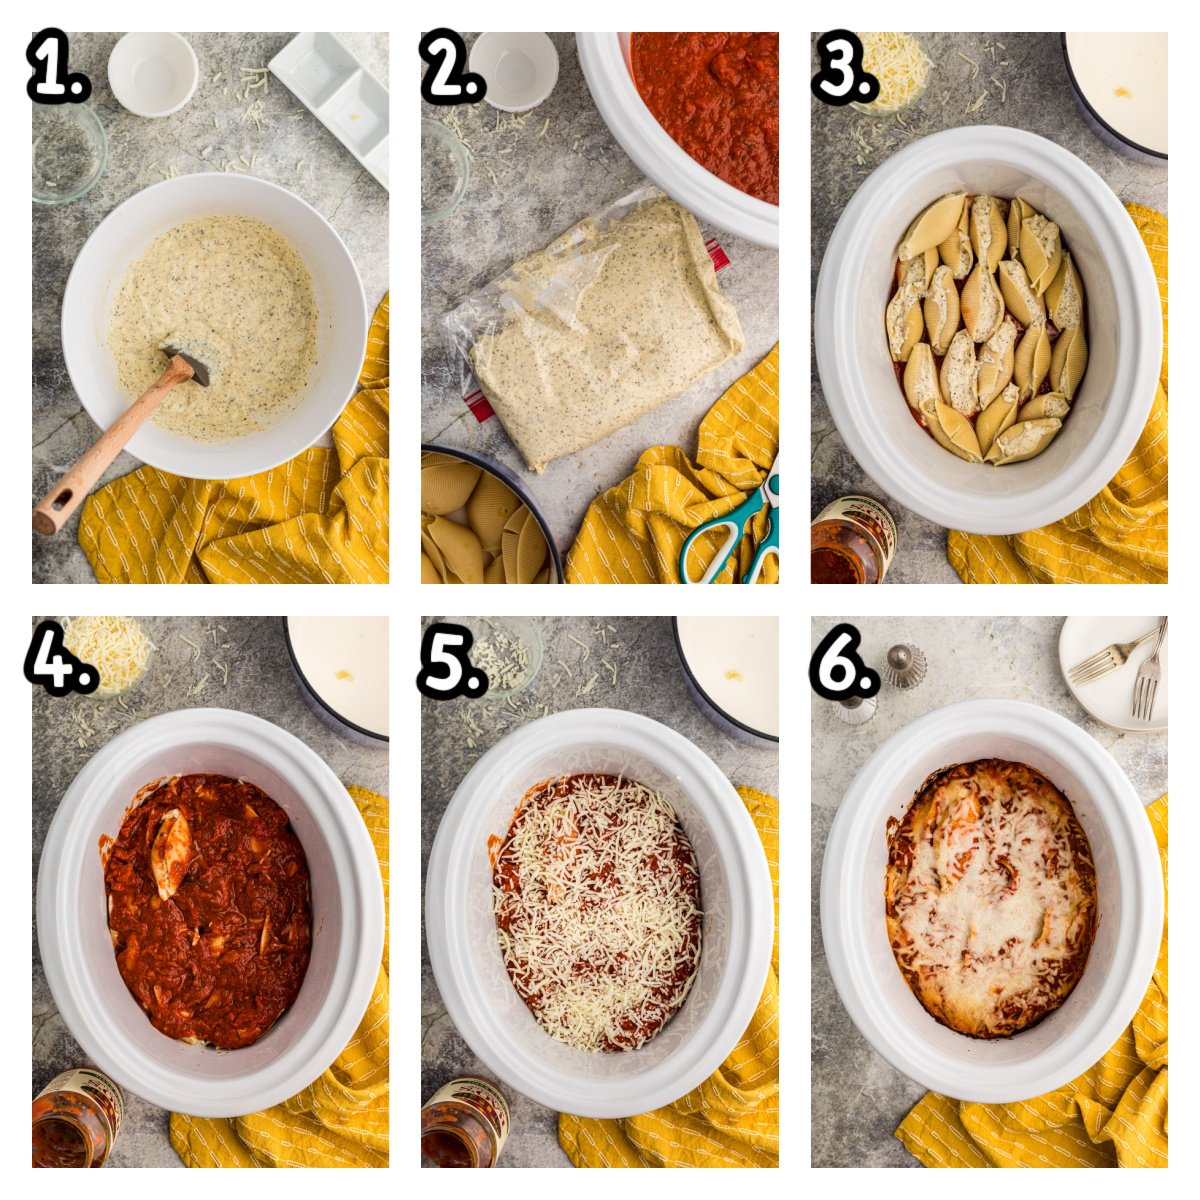 Images showing how to make stuffed shells in a slow cooker.